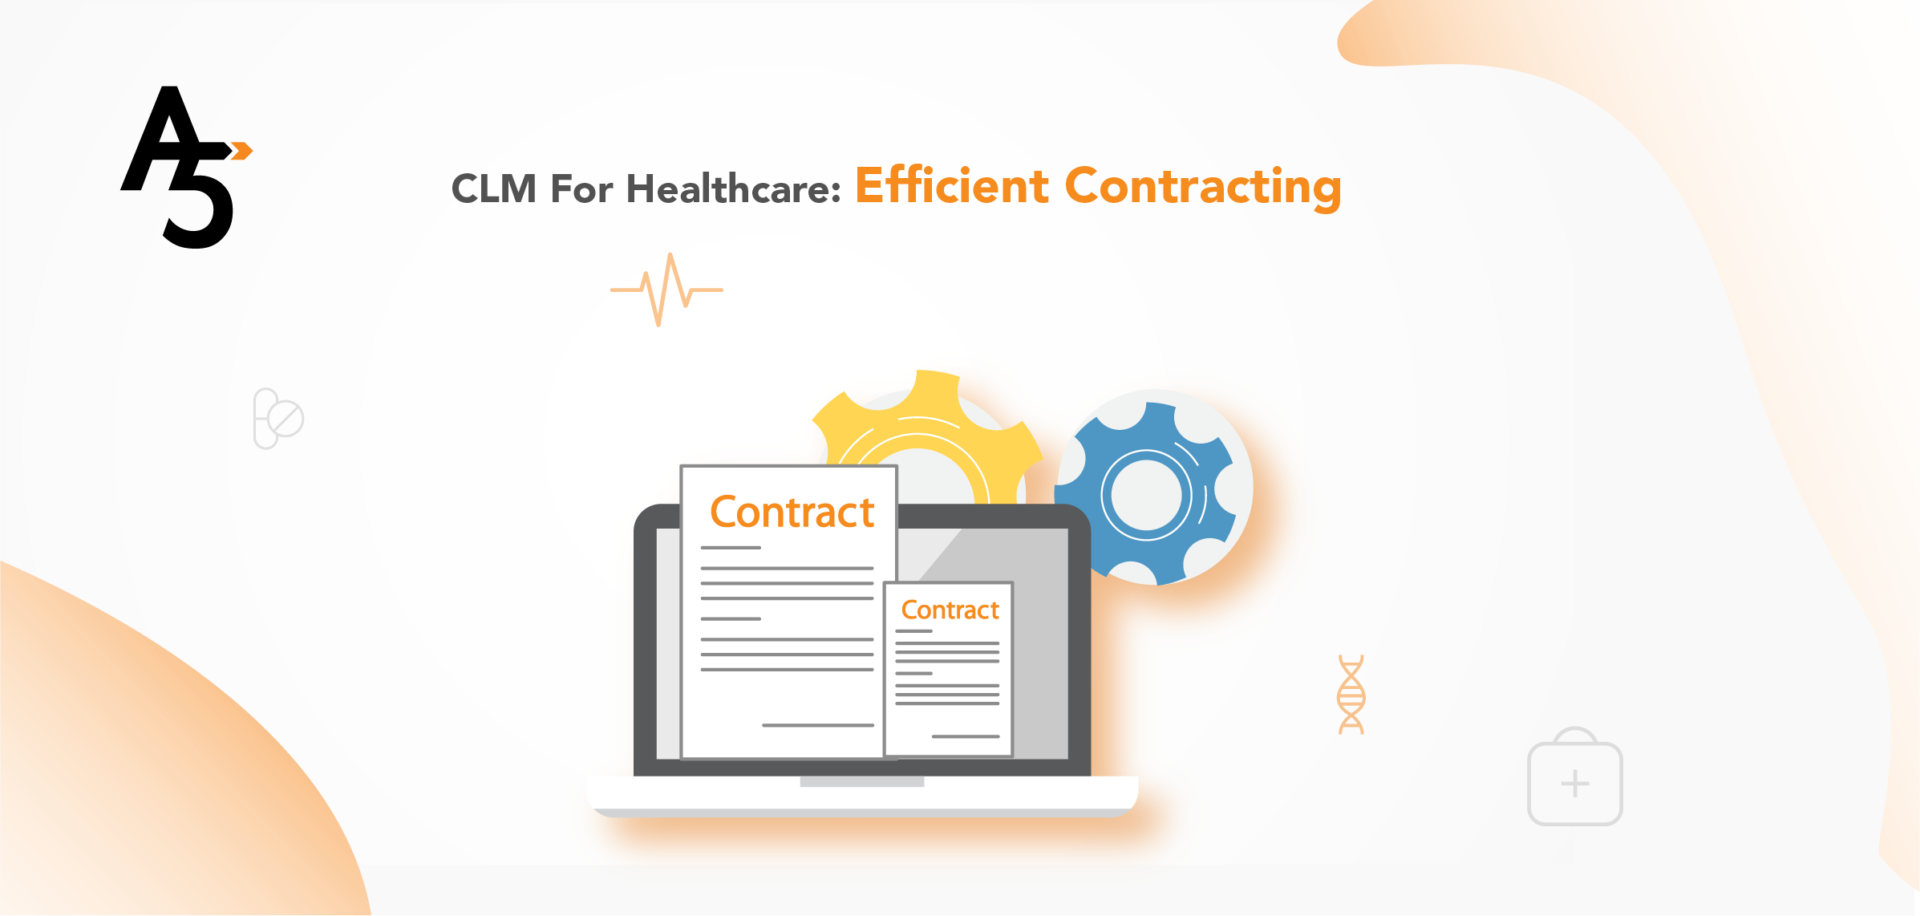 CLM for Healthcare: Efficient Contracting